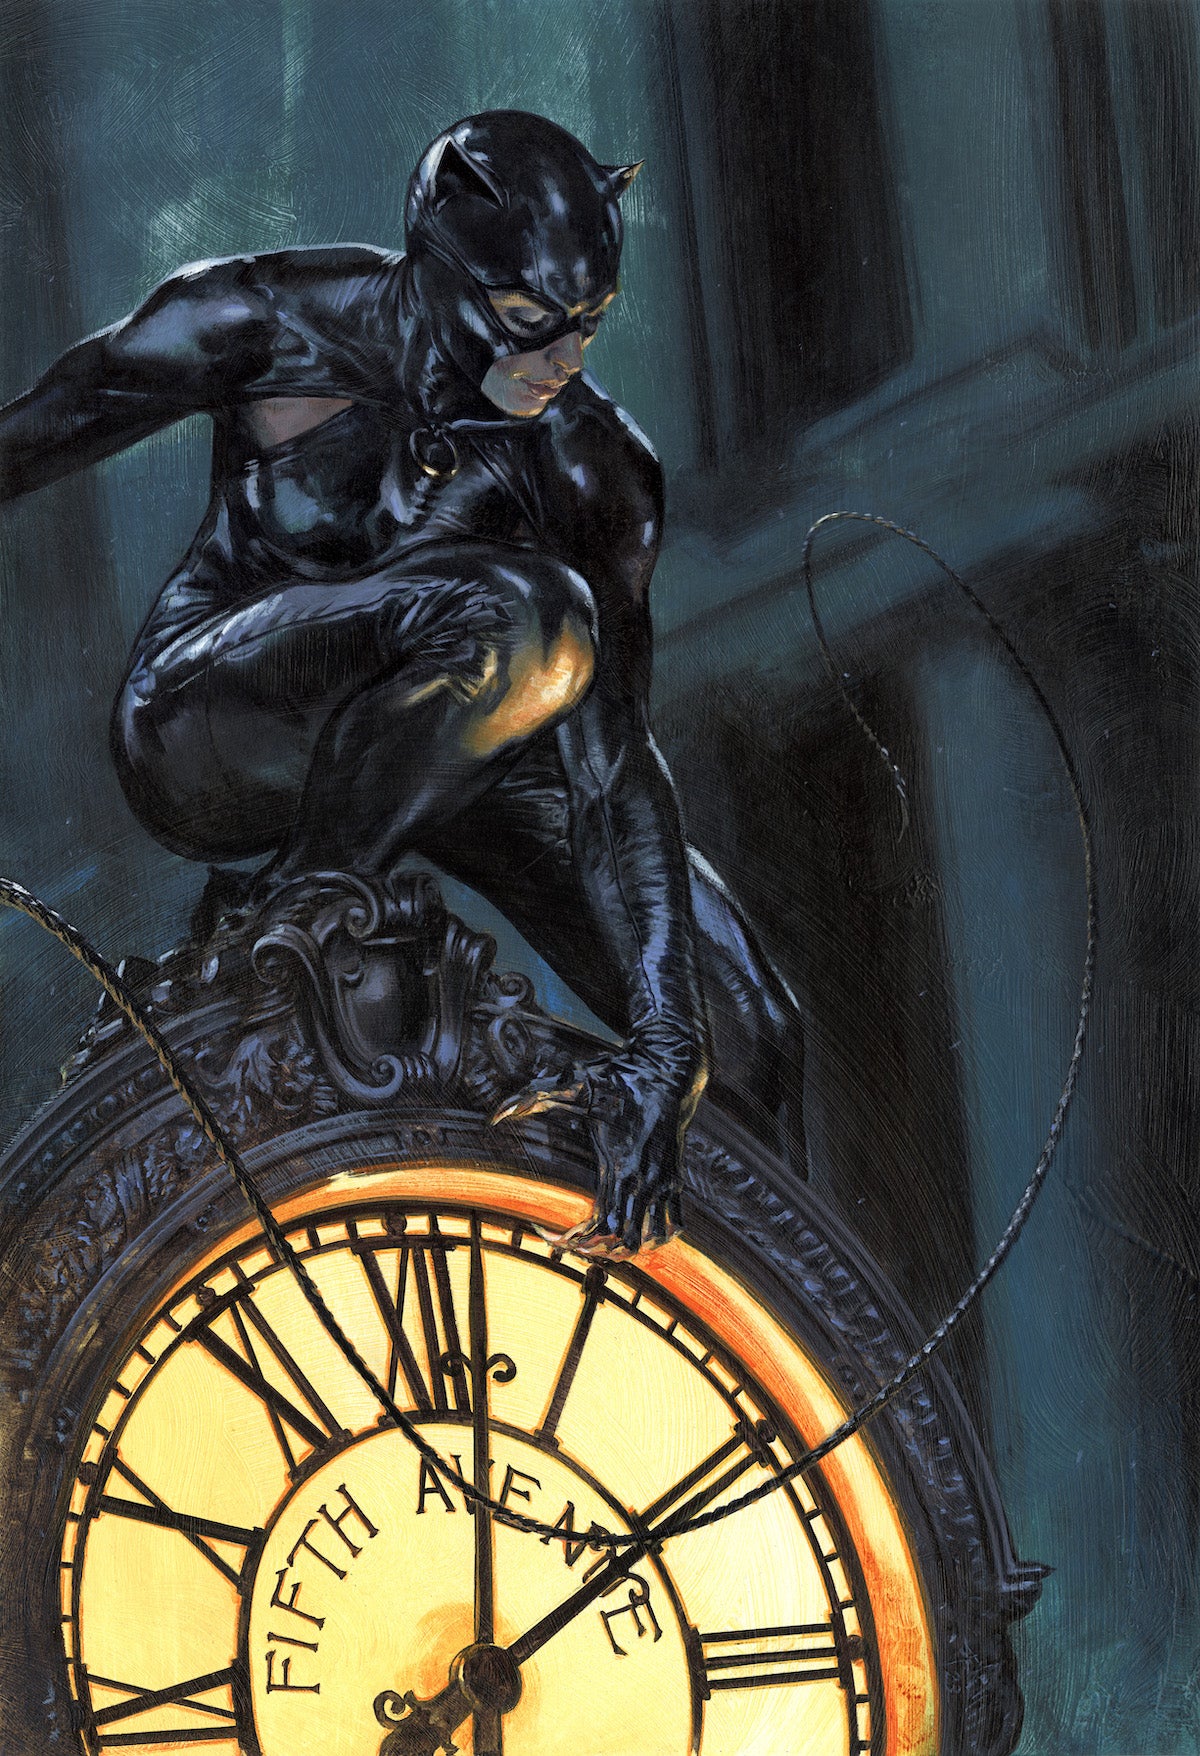 Catwoman by Gabrielle Dell'Otto